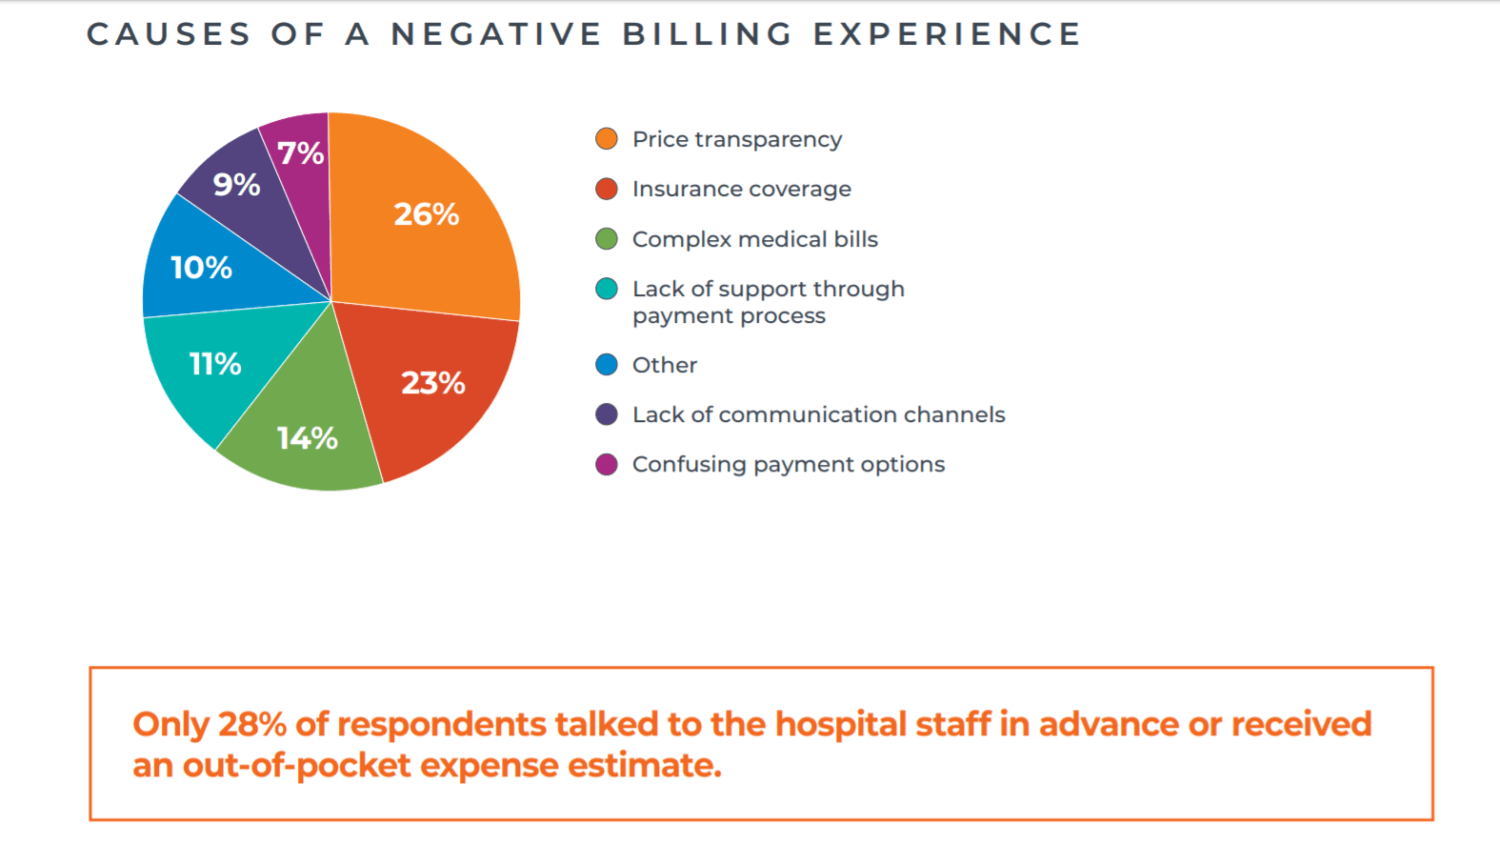 Causes of negative billing experience